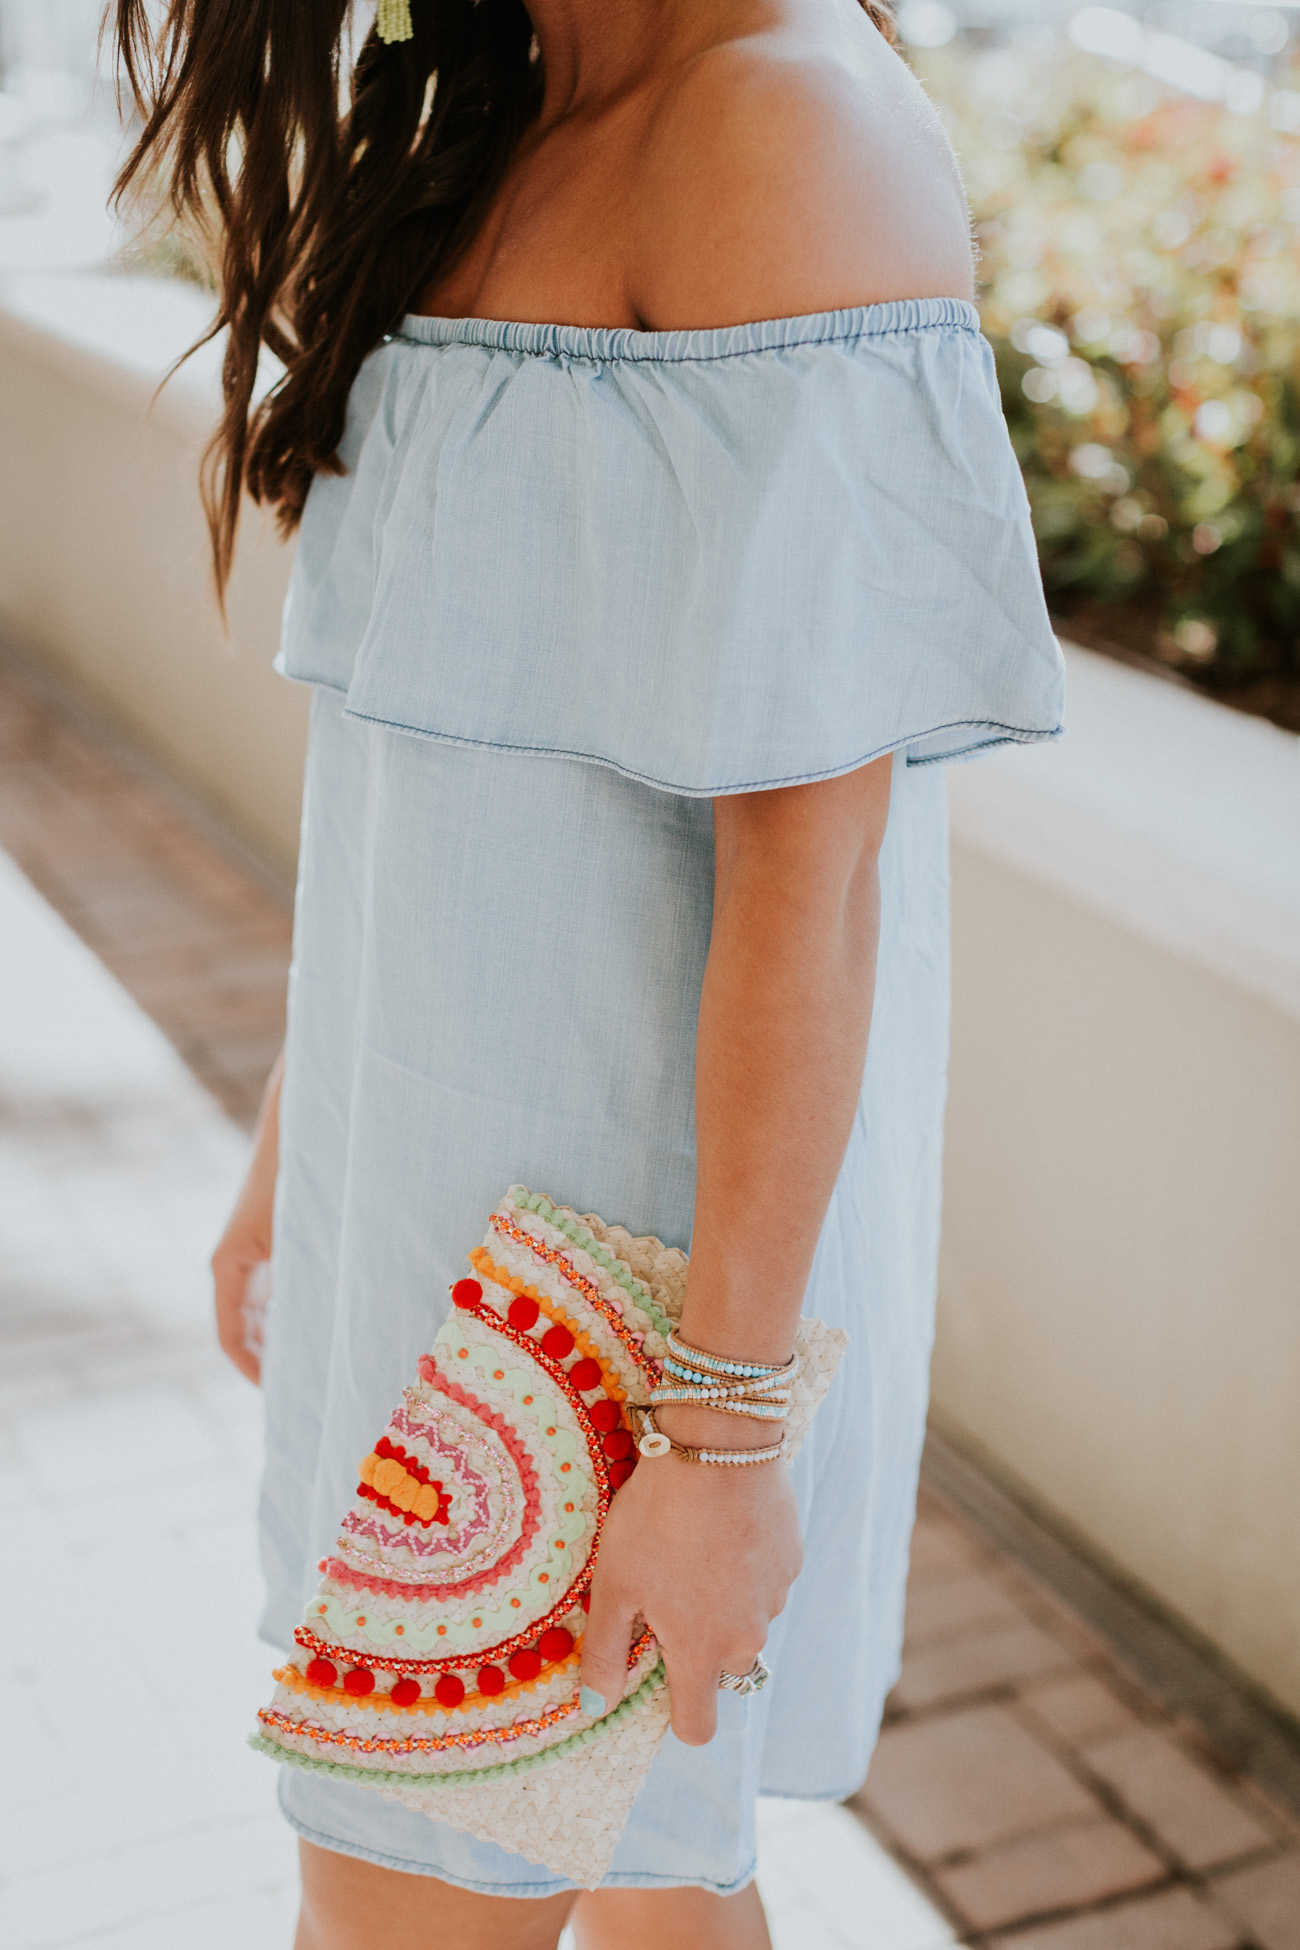 neon tassel earrings, strappy neutral heels, embroidered clutch, tassel clutch, chambray off the shoulder dress, ruffle off the shoulder dress, chambray dress, embroidered clutch, vacation style, turquoise tassel earrings, nude wedges, strappy wedge sandals, tassel clutch // grace wainwright a southern drawl